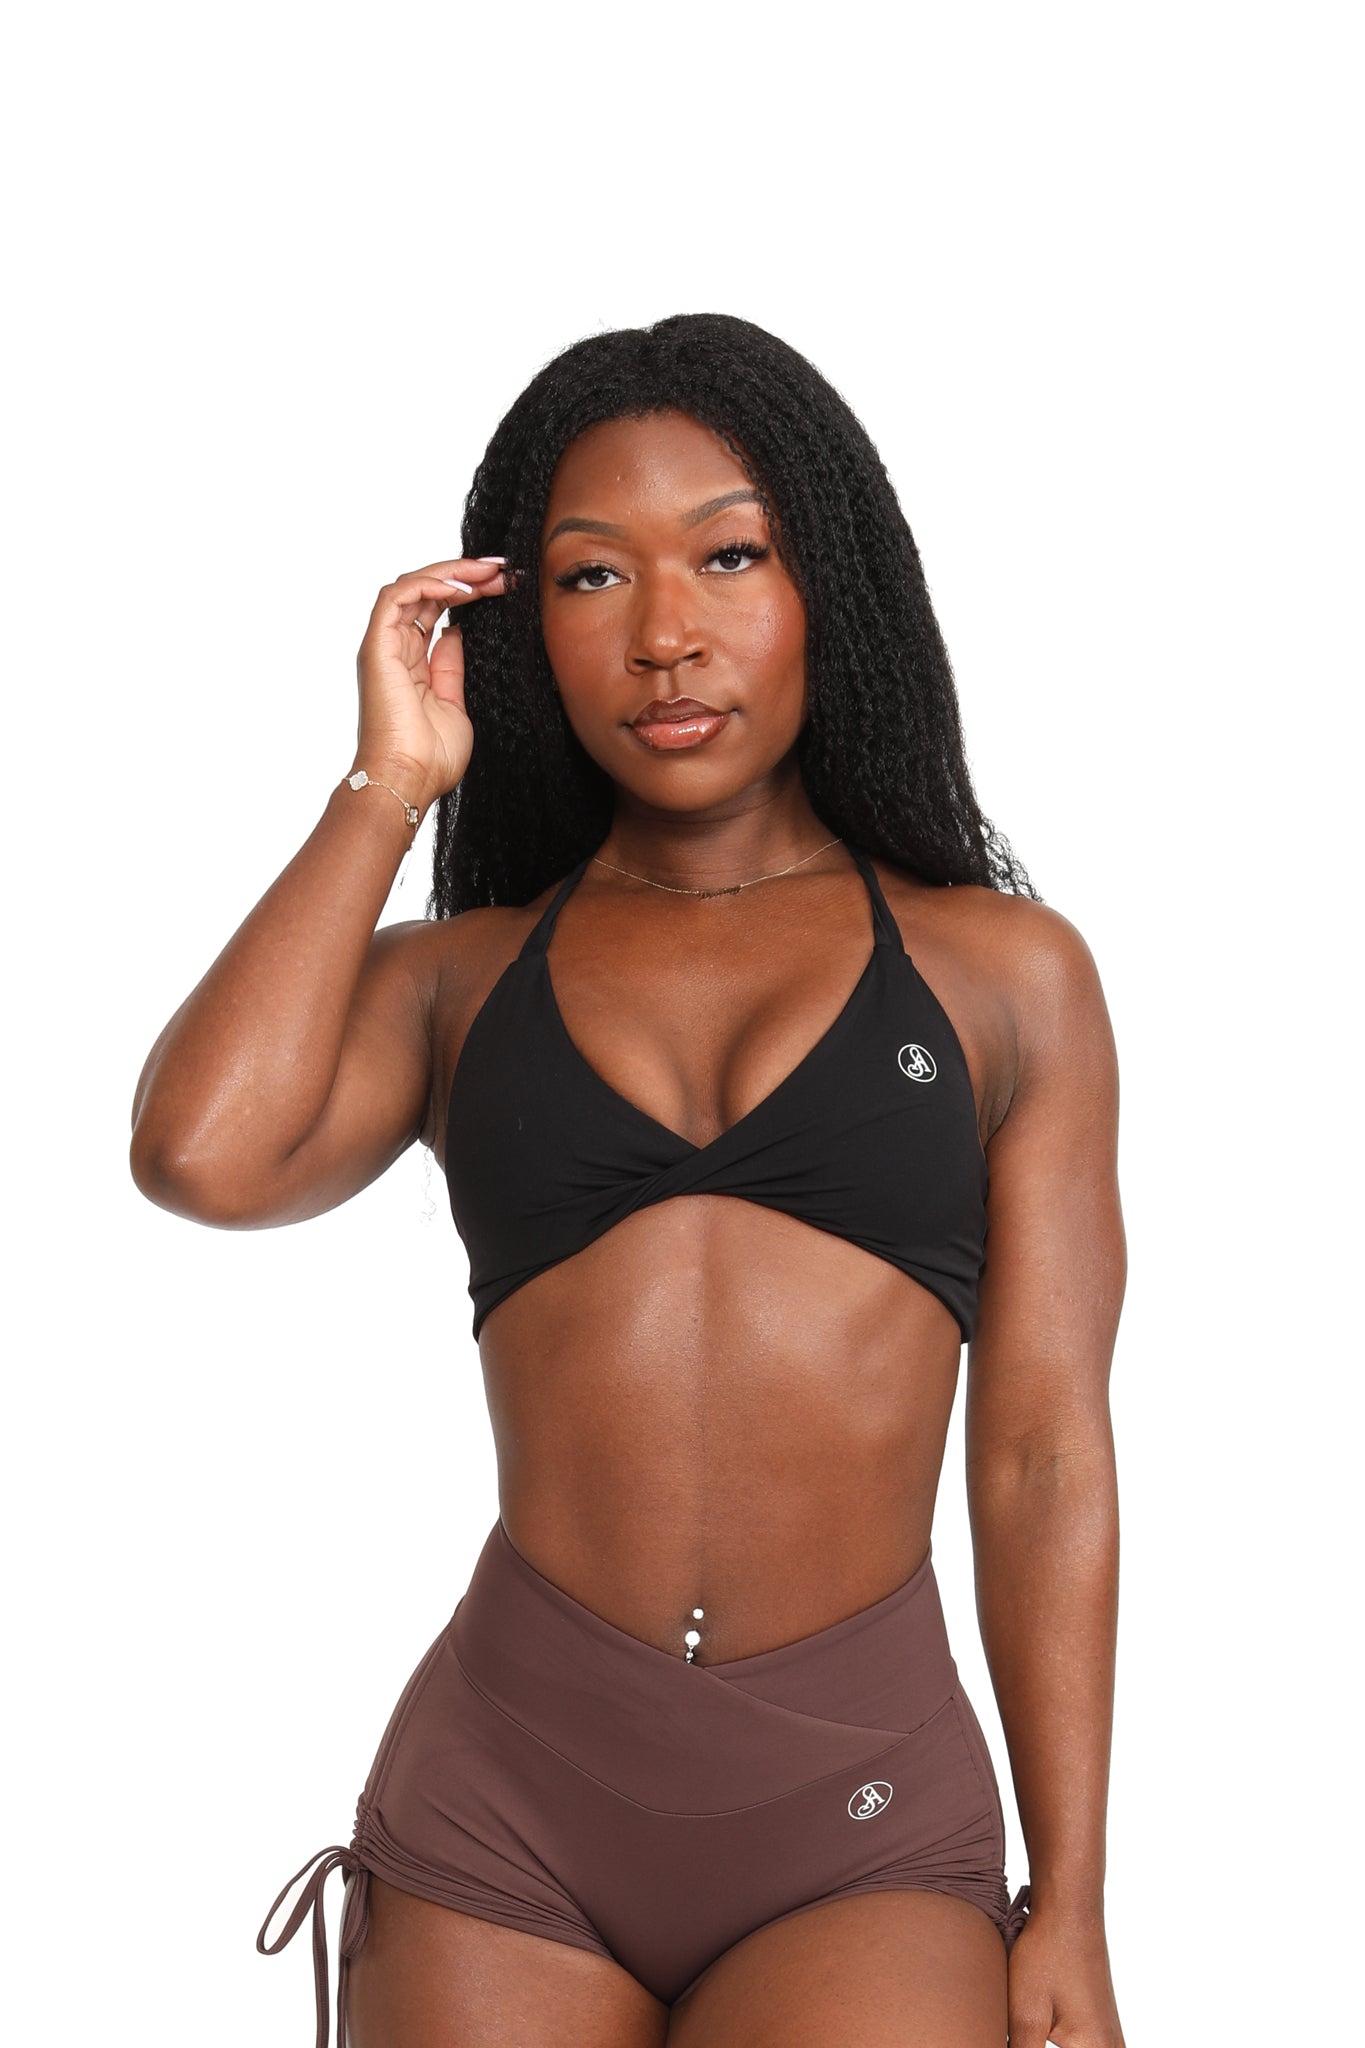 Allure Sports Bra - Speckled